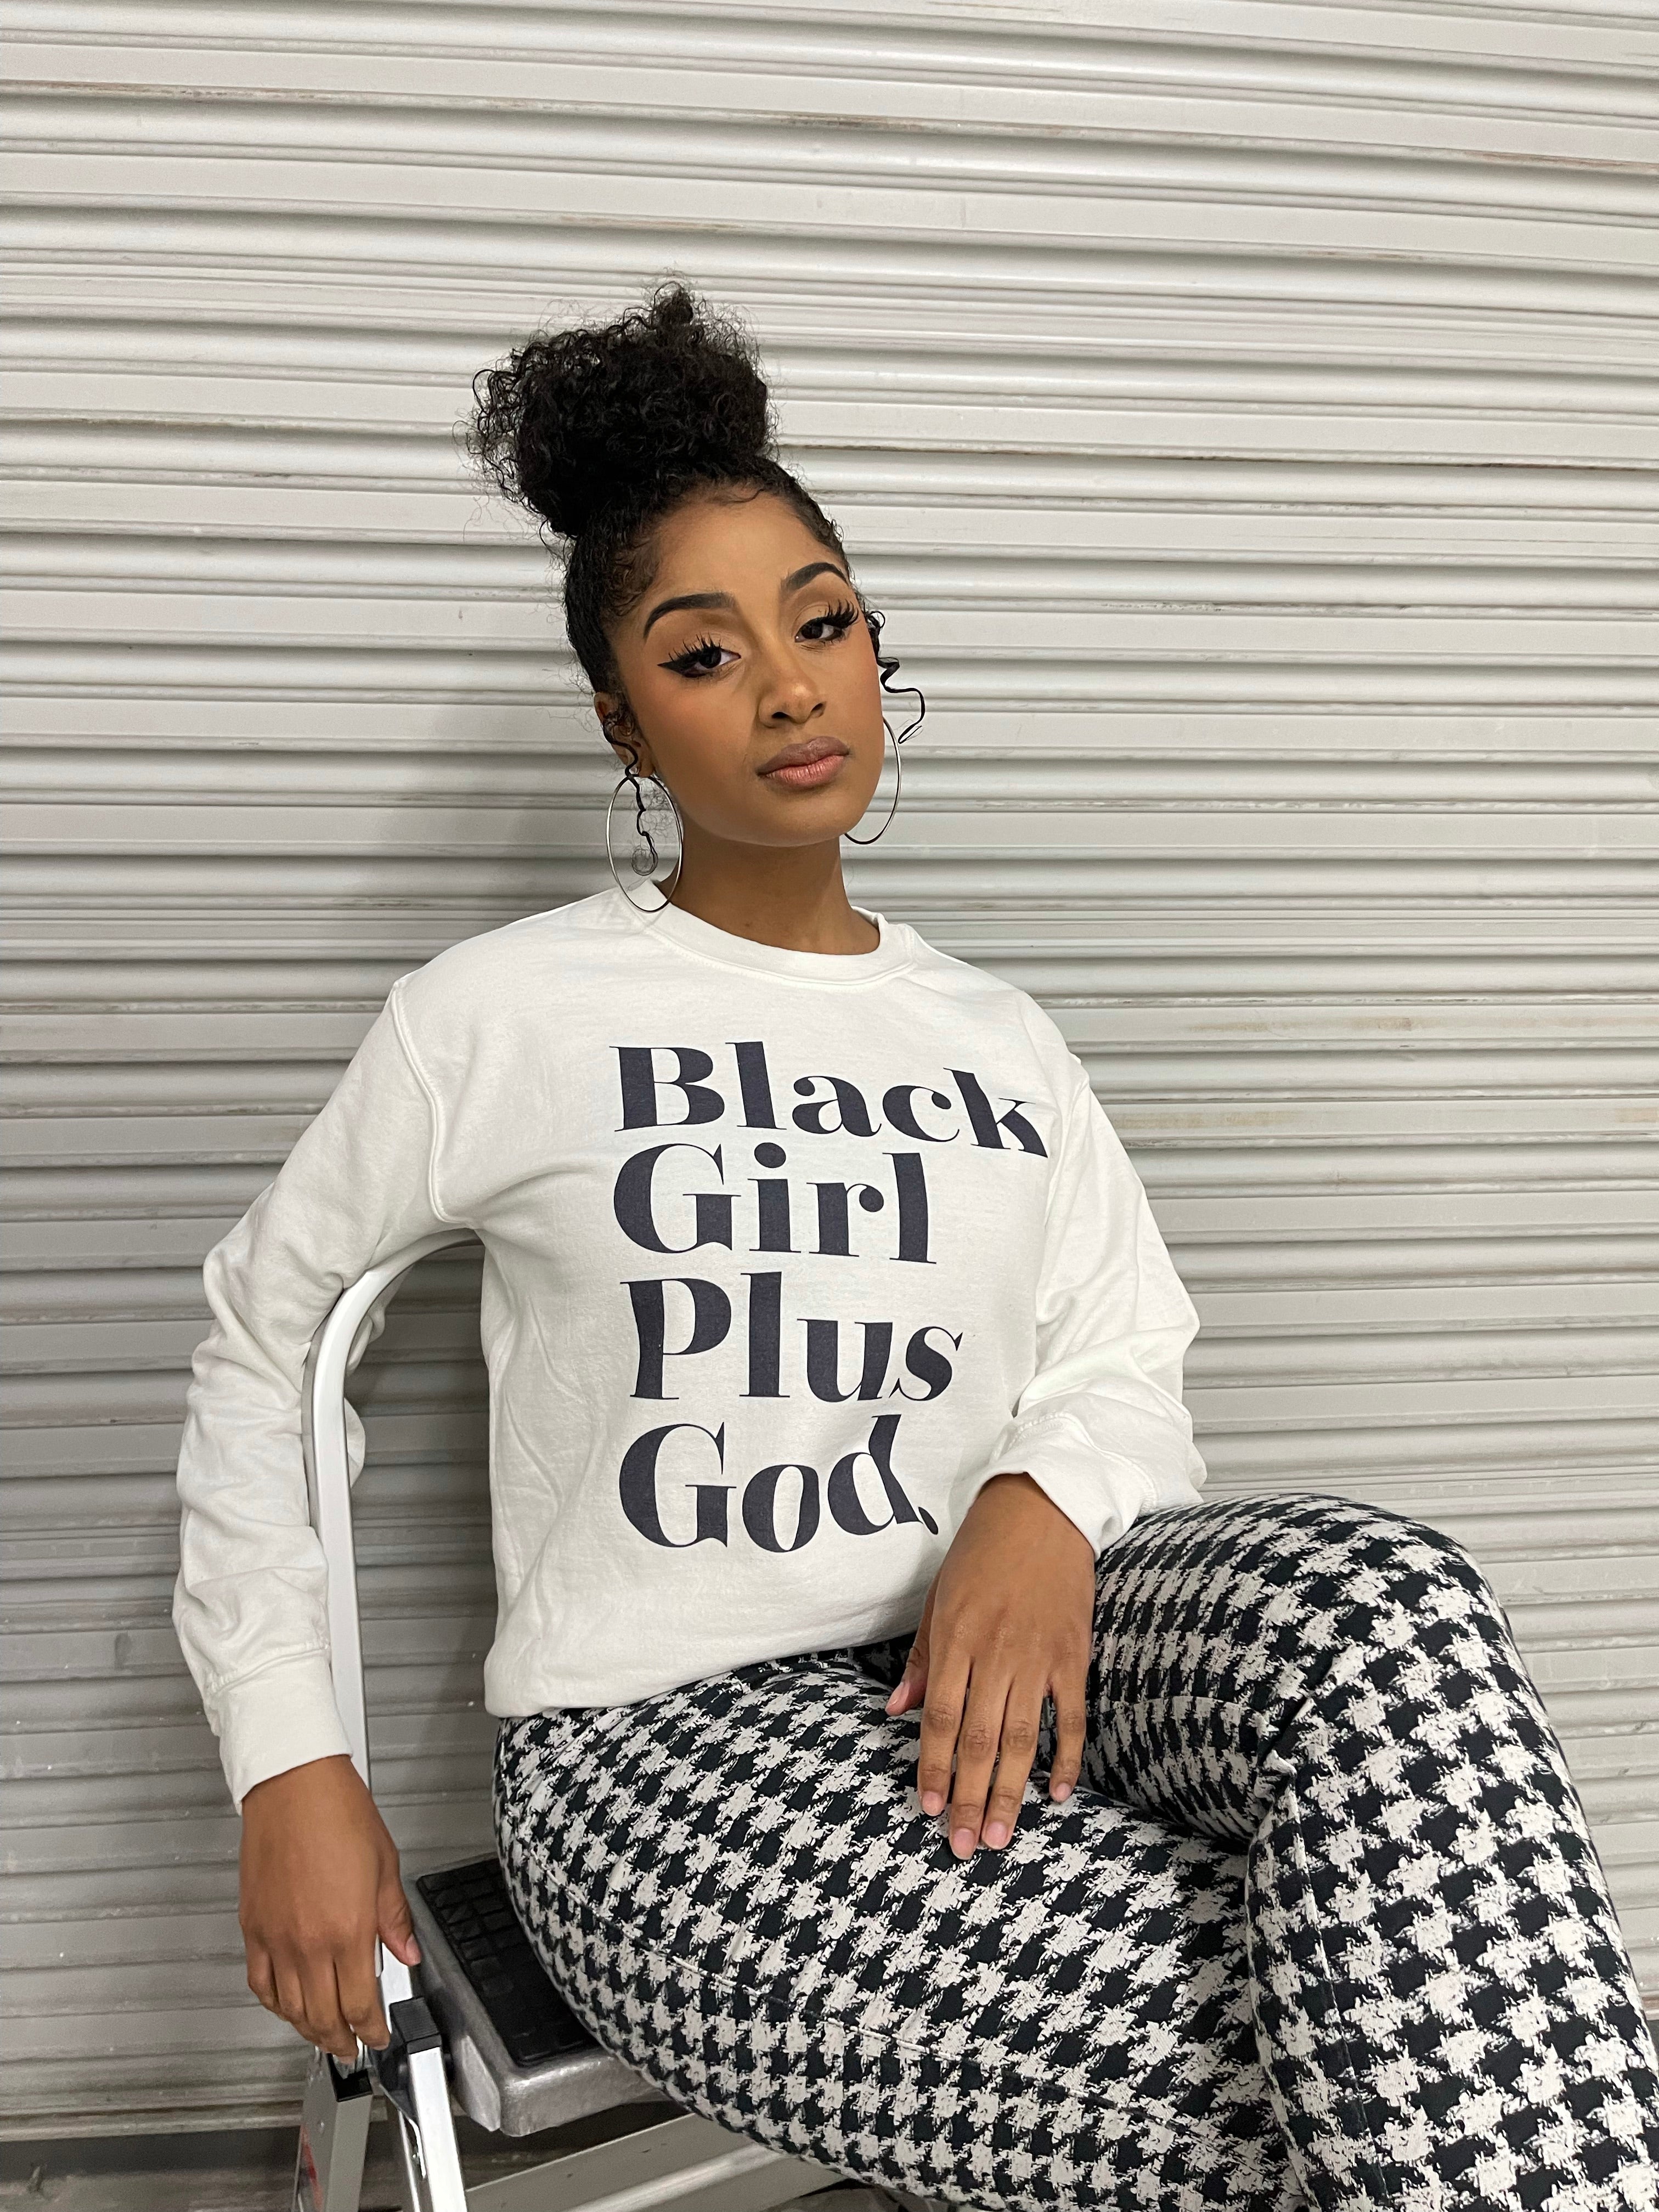 Black Girl Plus God Special Edition Sweatshirt - Be The Change